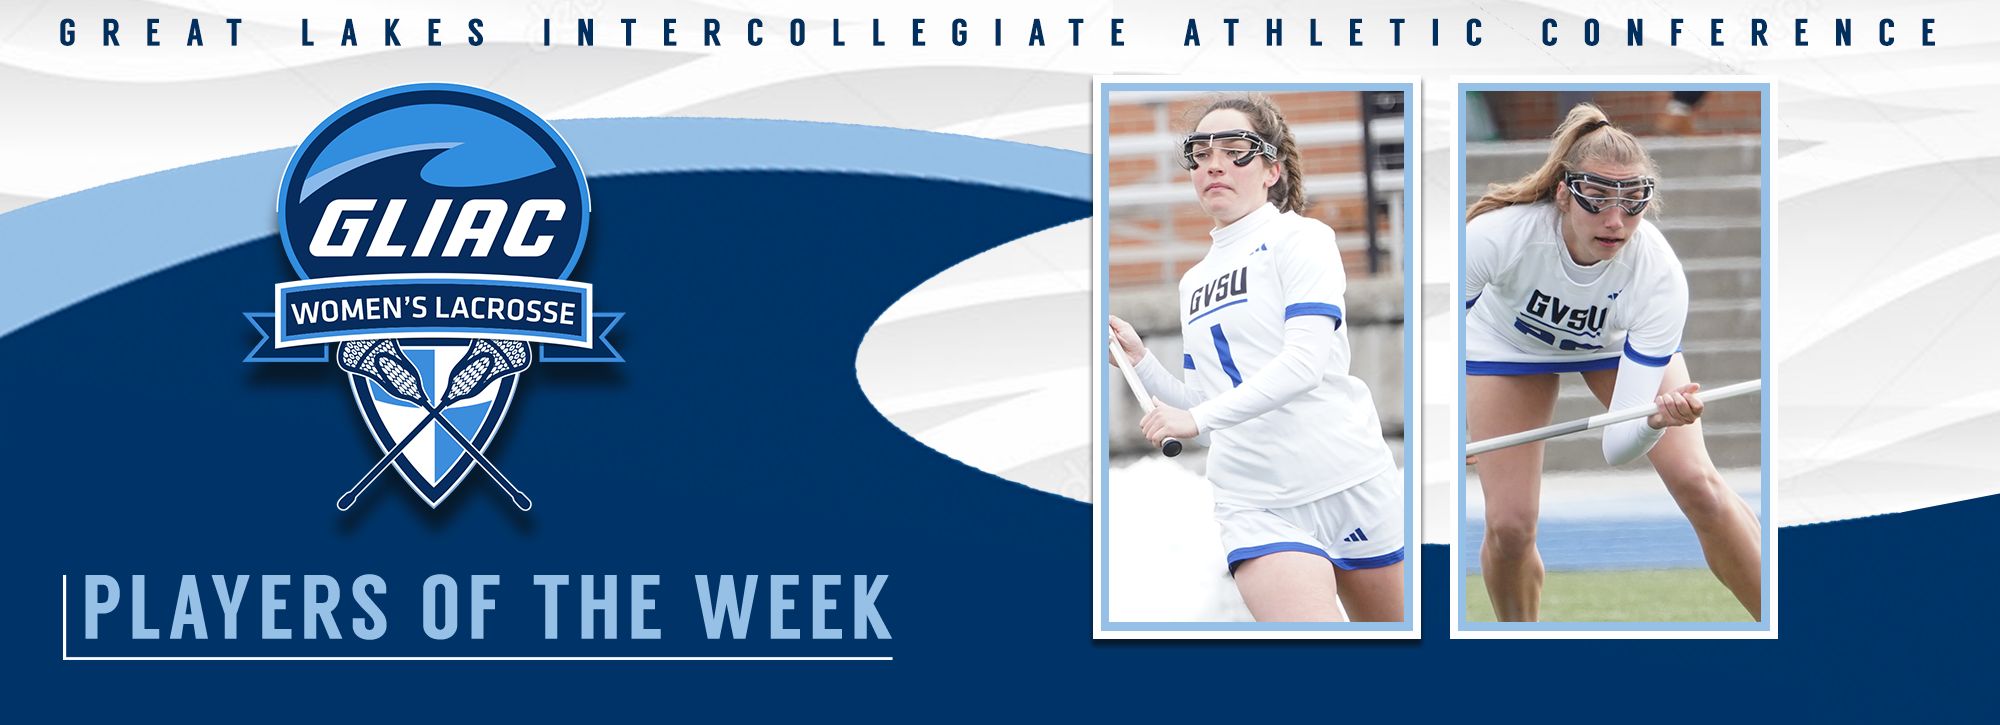 GVSU's Crittenden and Rothe earn GLIAC Women's Lacrosse Player of the Week honors